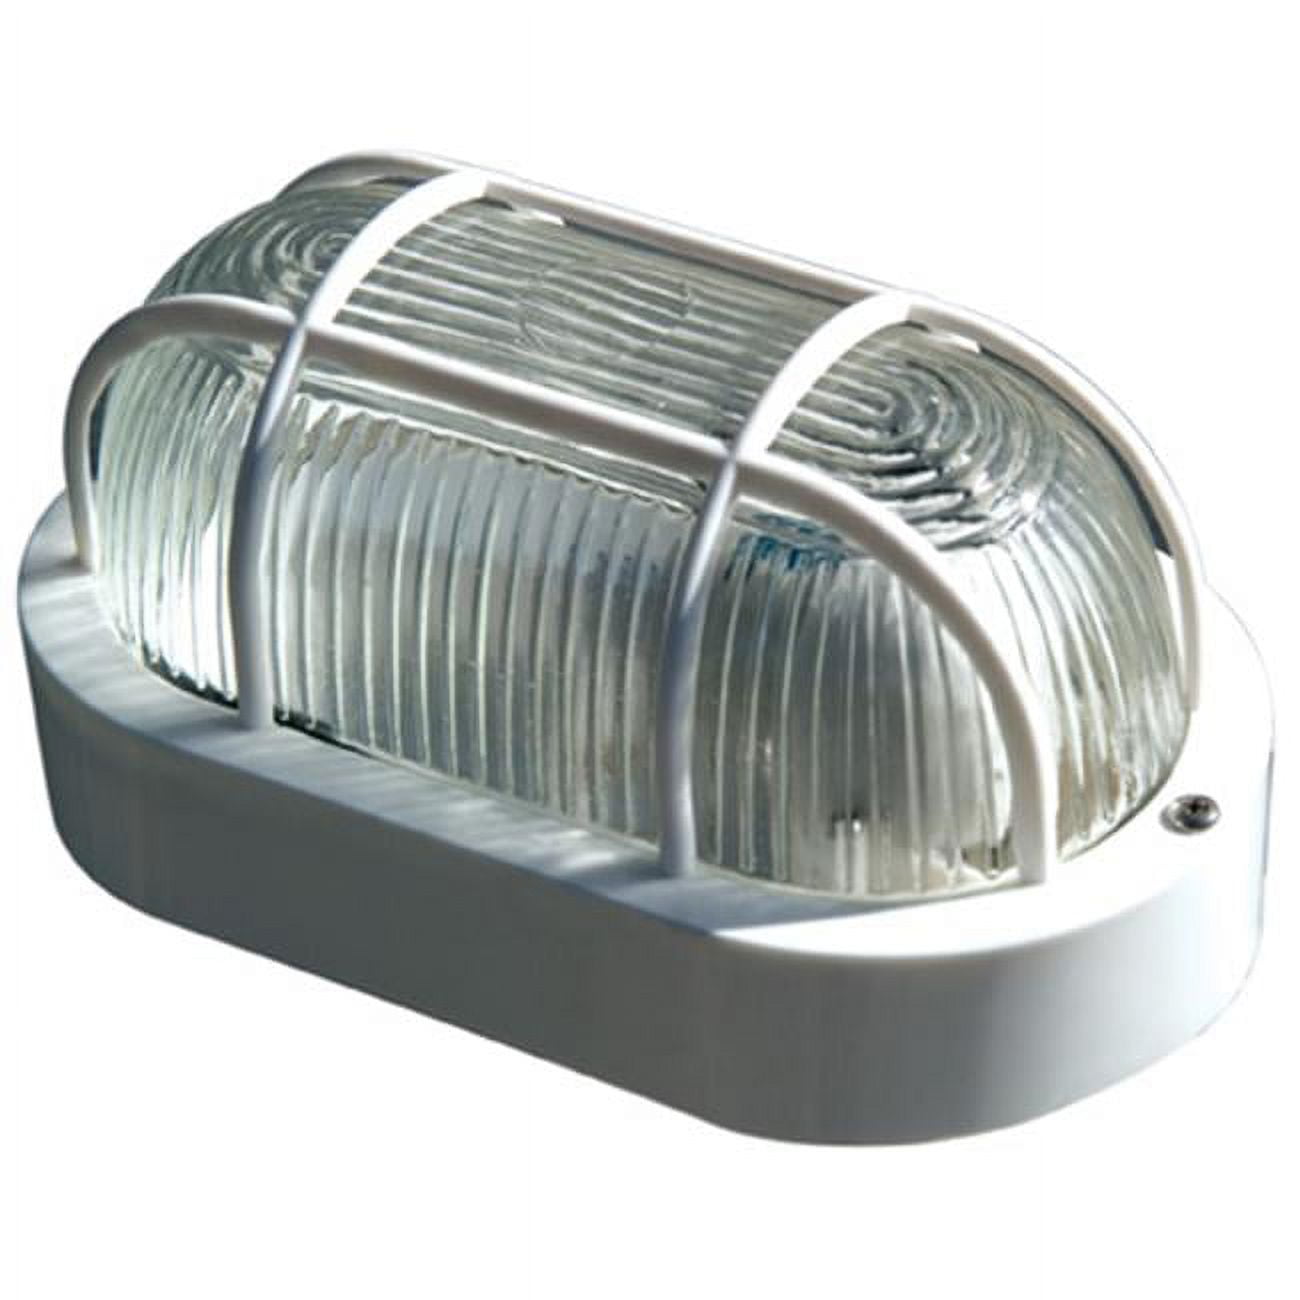 W2020-w 7.81 X 3.88 X 4.38 In. 120 V 60 Watts Incandenscent Type Polycarbonate Surface Mounted Wall Fixture Light, White